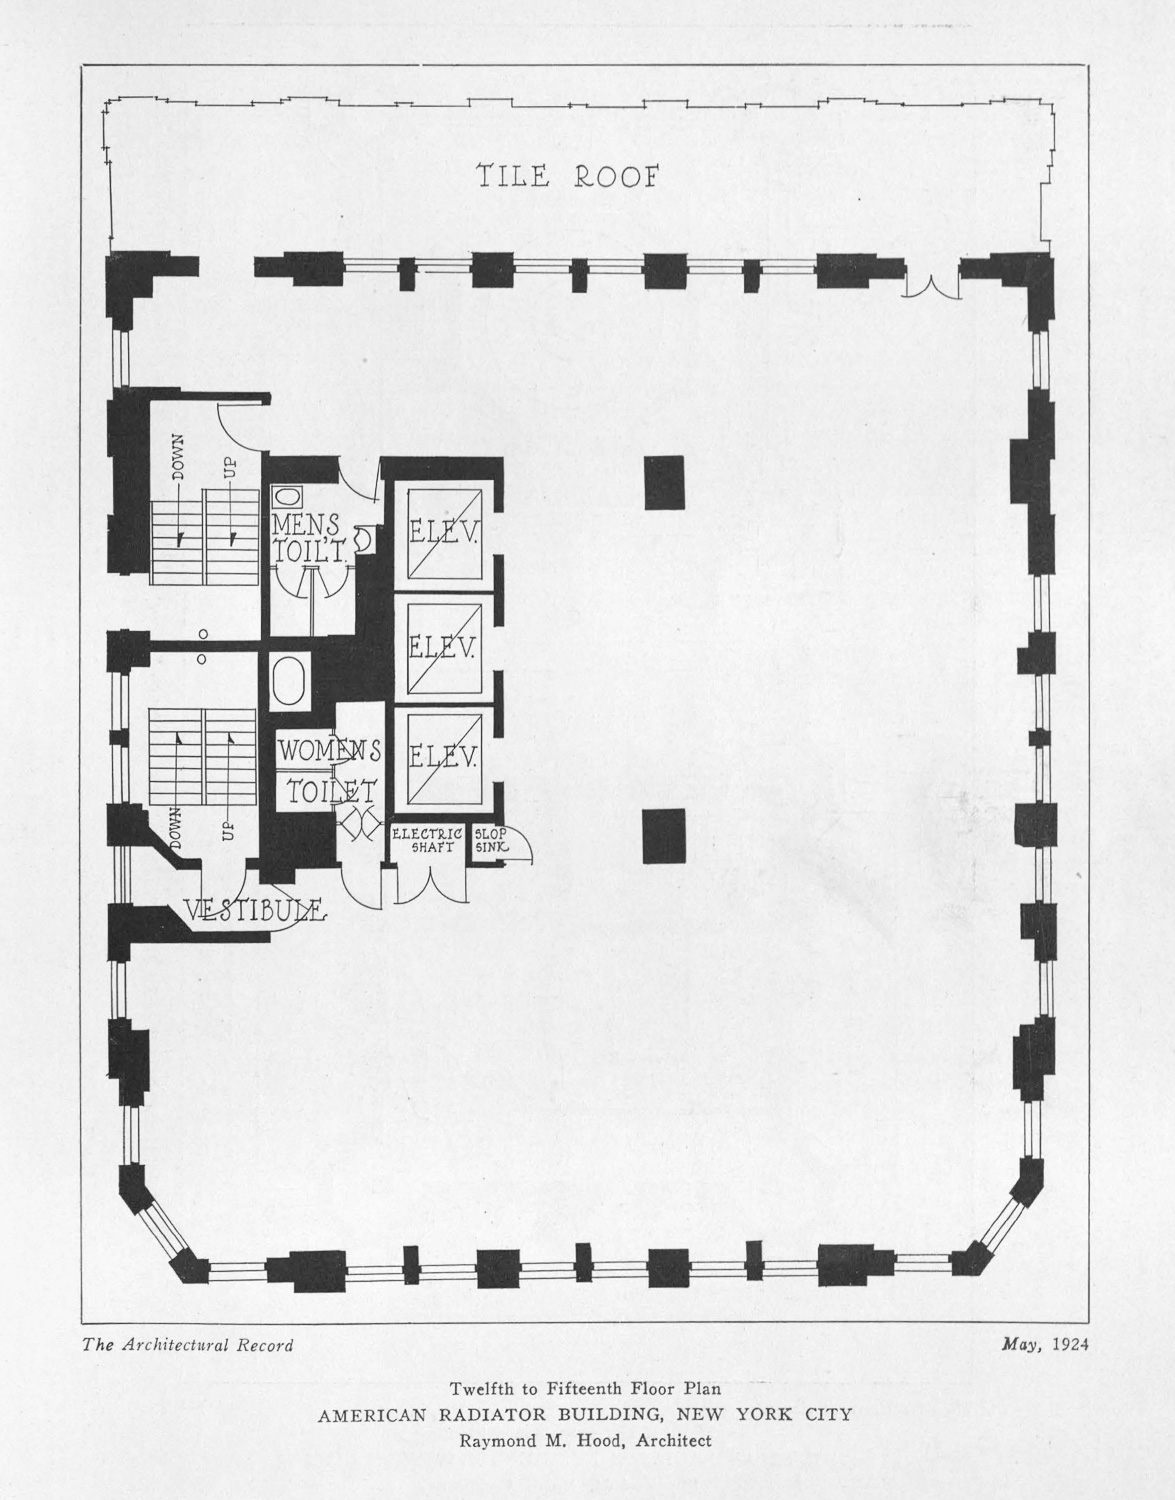 A typical floor plan of stories twelve through fifteen. There are many windows on all four sides of the skyscraper. Th floor space is mostly open, with just two small columns in the center. Tucked against the left wall are the service areas such as the elevator shafts, staircases, and restrooms.